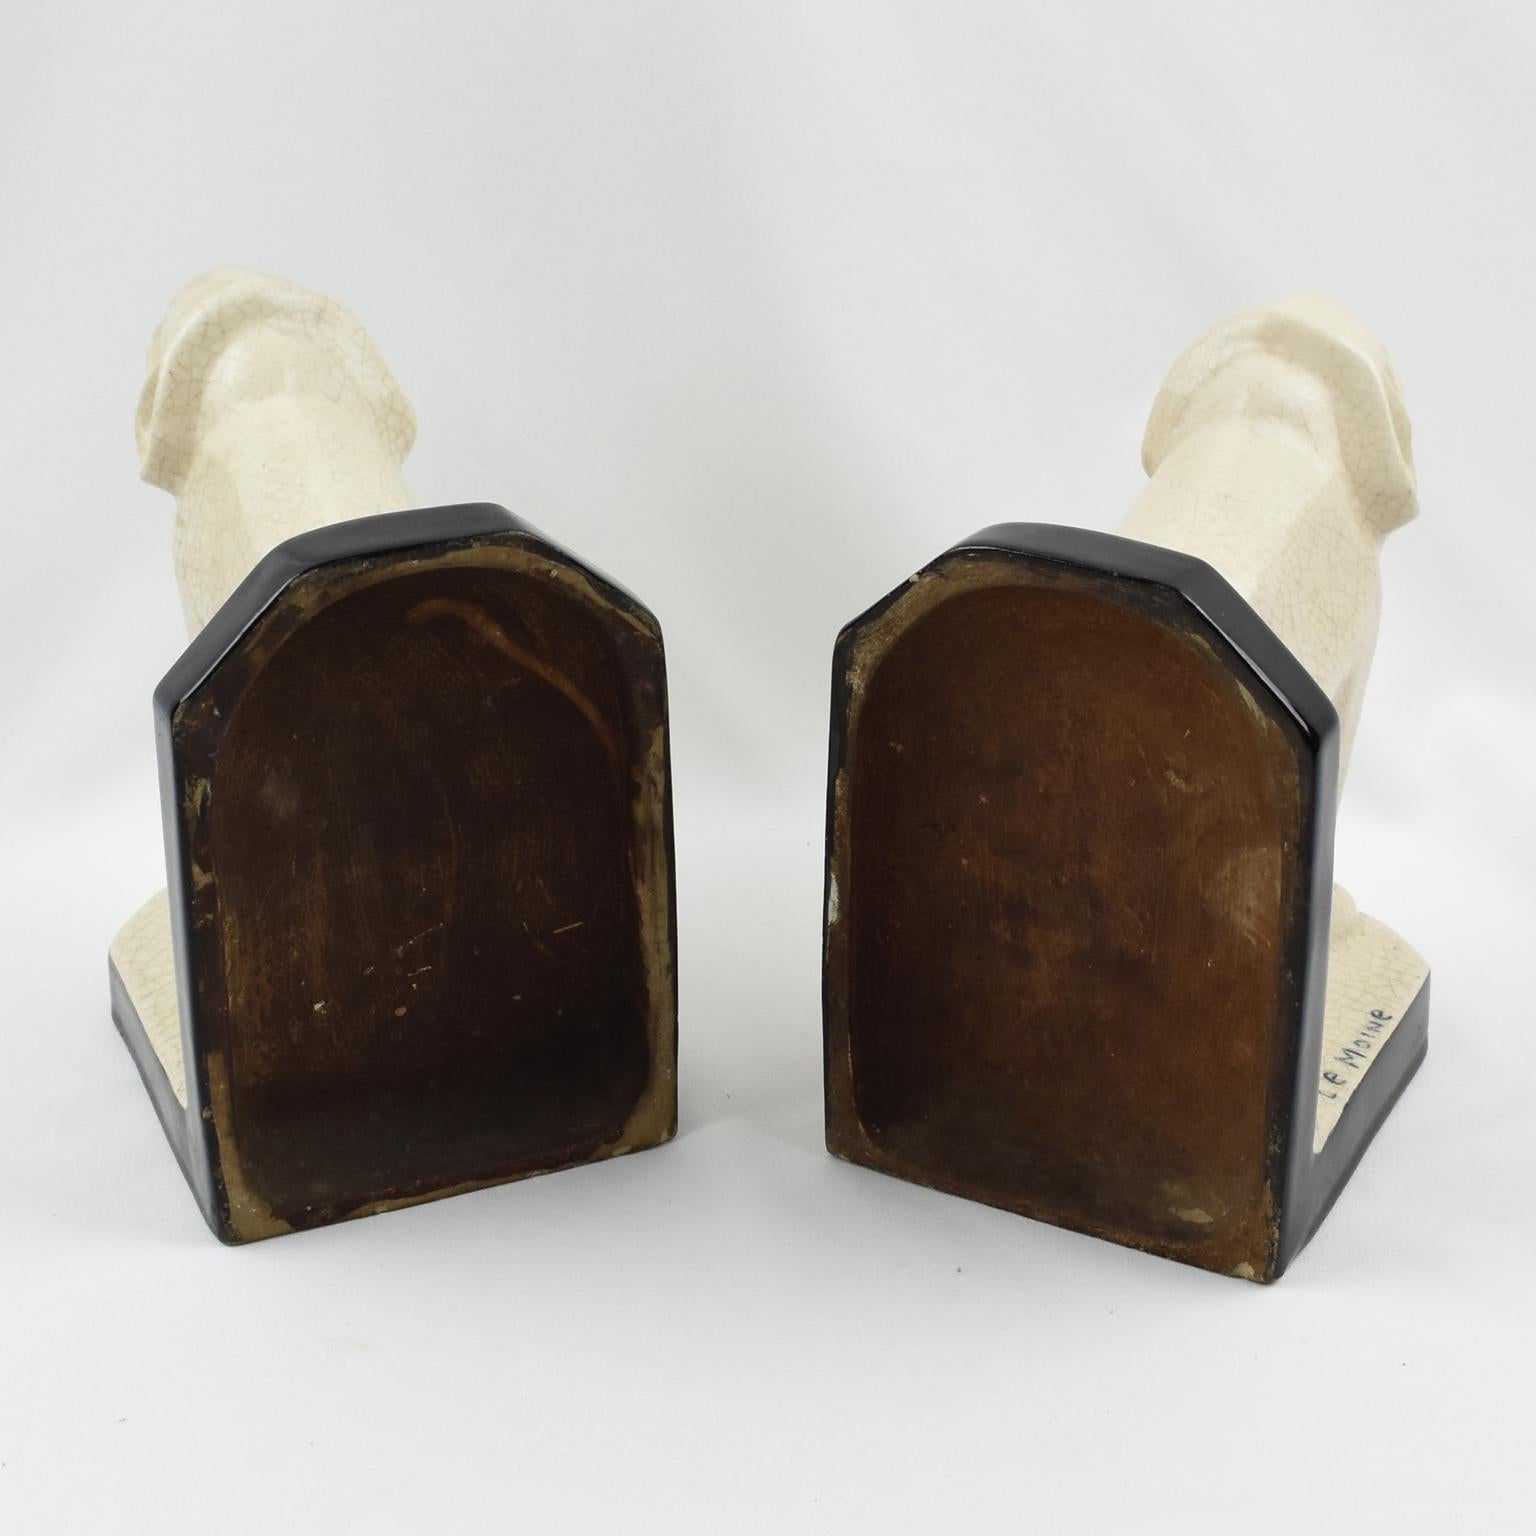 French Art Deco Crackle Ceramic Elephant Sculpture Bookends by Le Moine, France 1930s